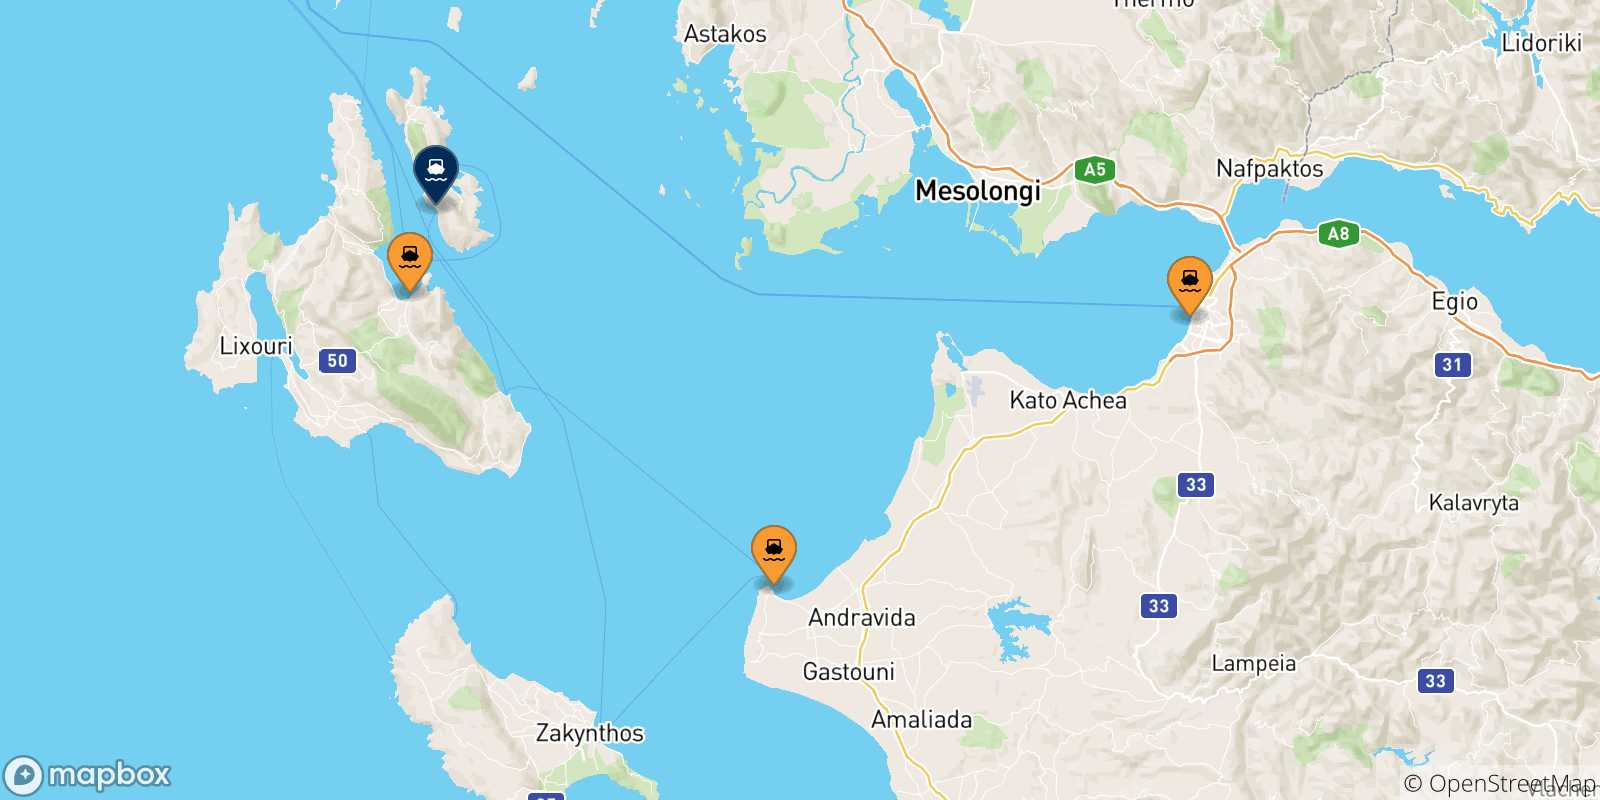 Map of the possible routes between Greece and Pisaetos (Ithaka)